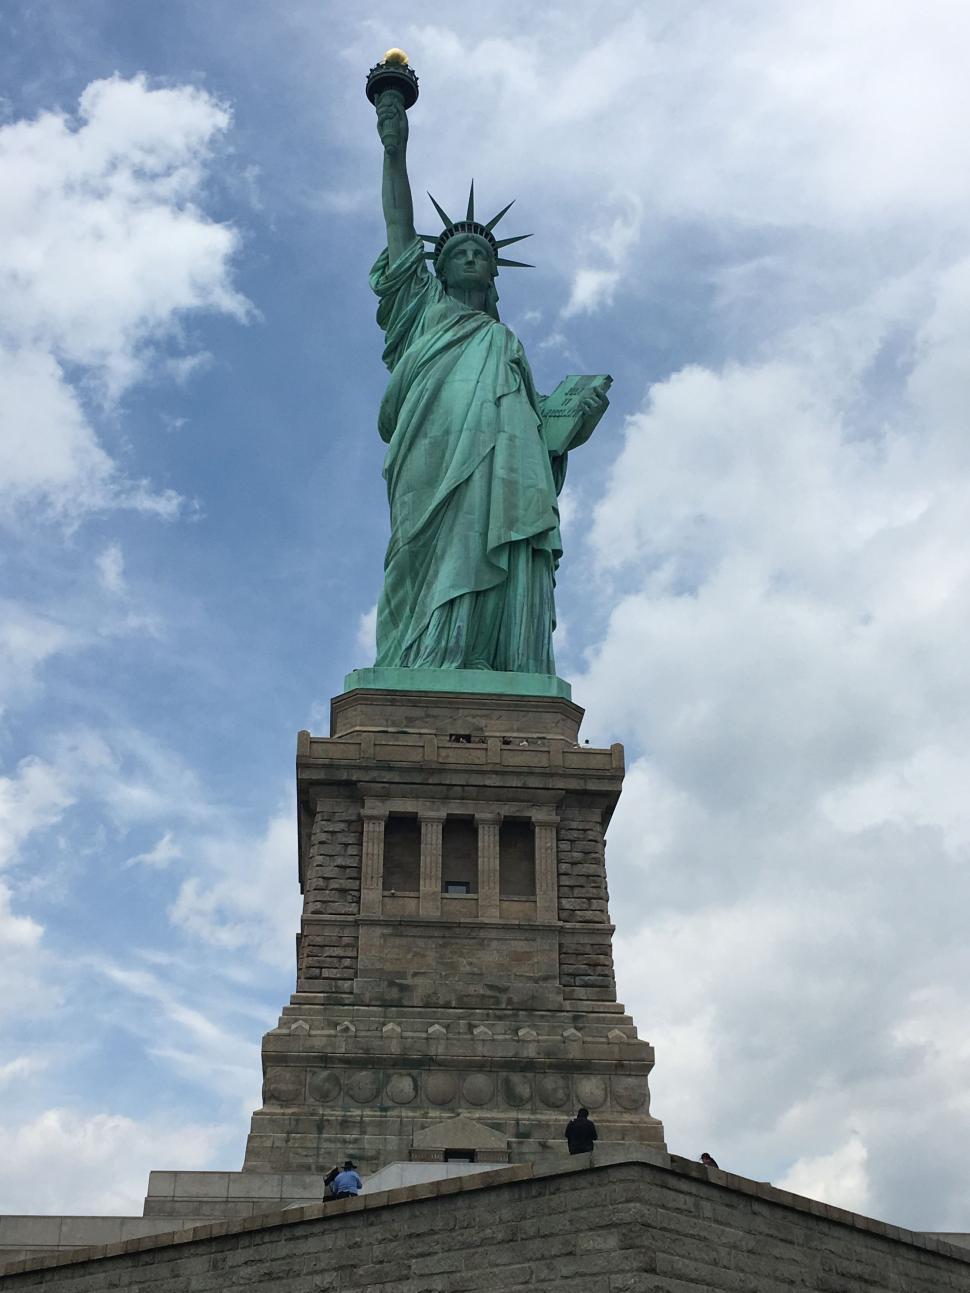 Free Image of Statue of Liberty in New York 